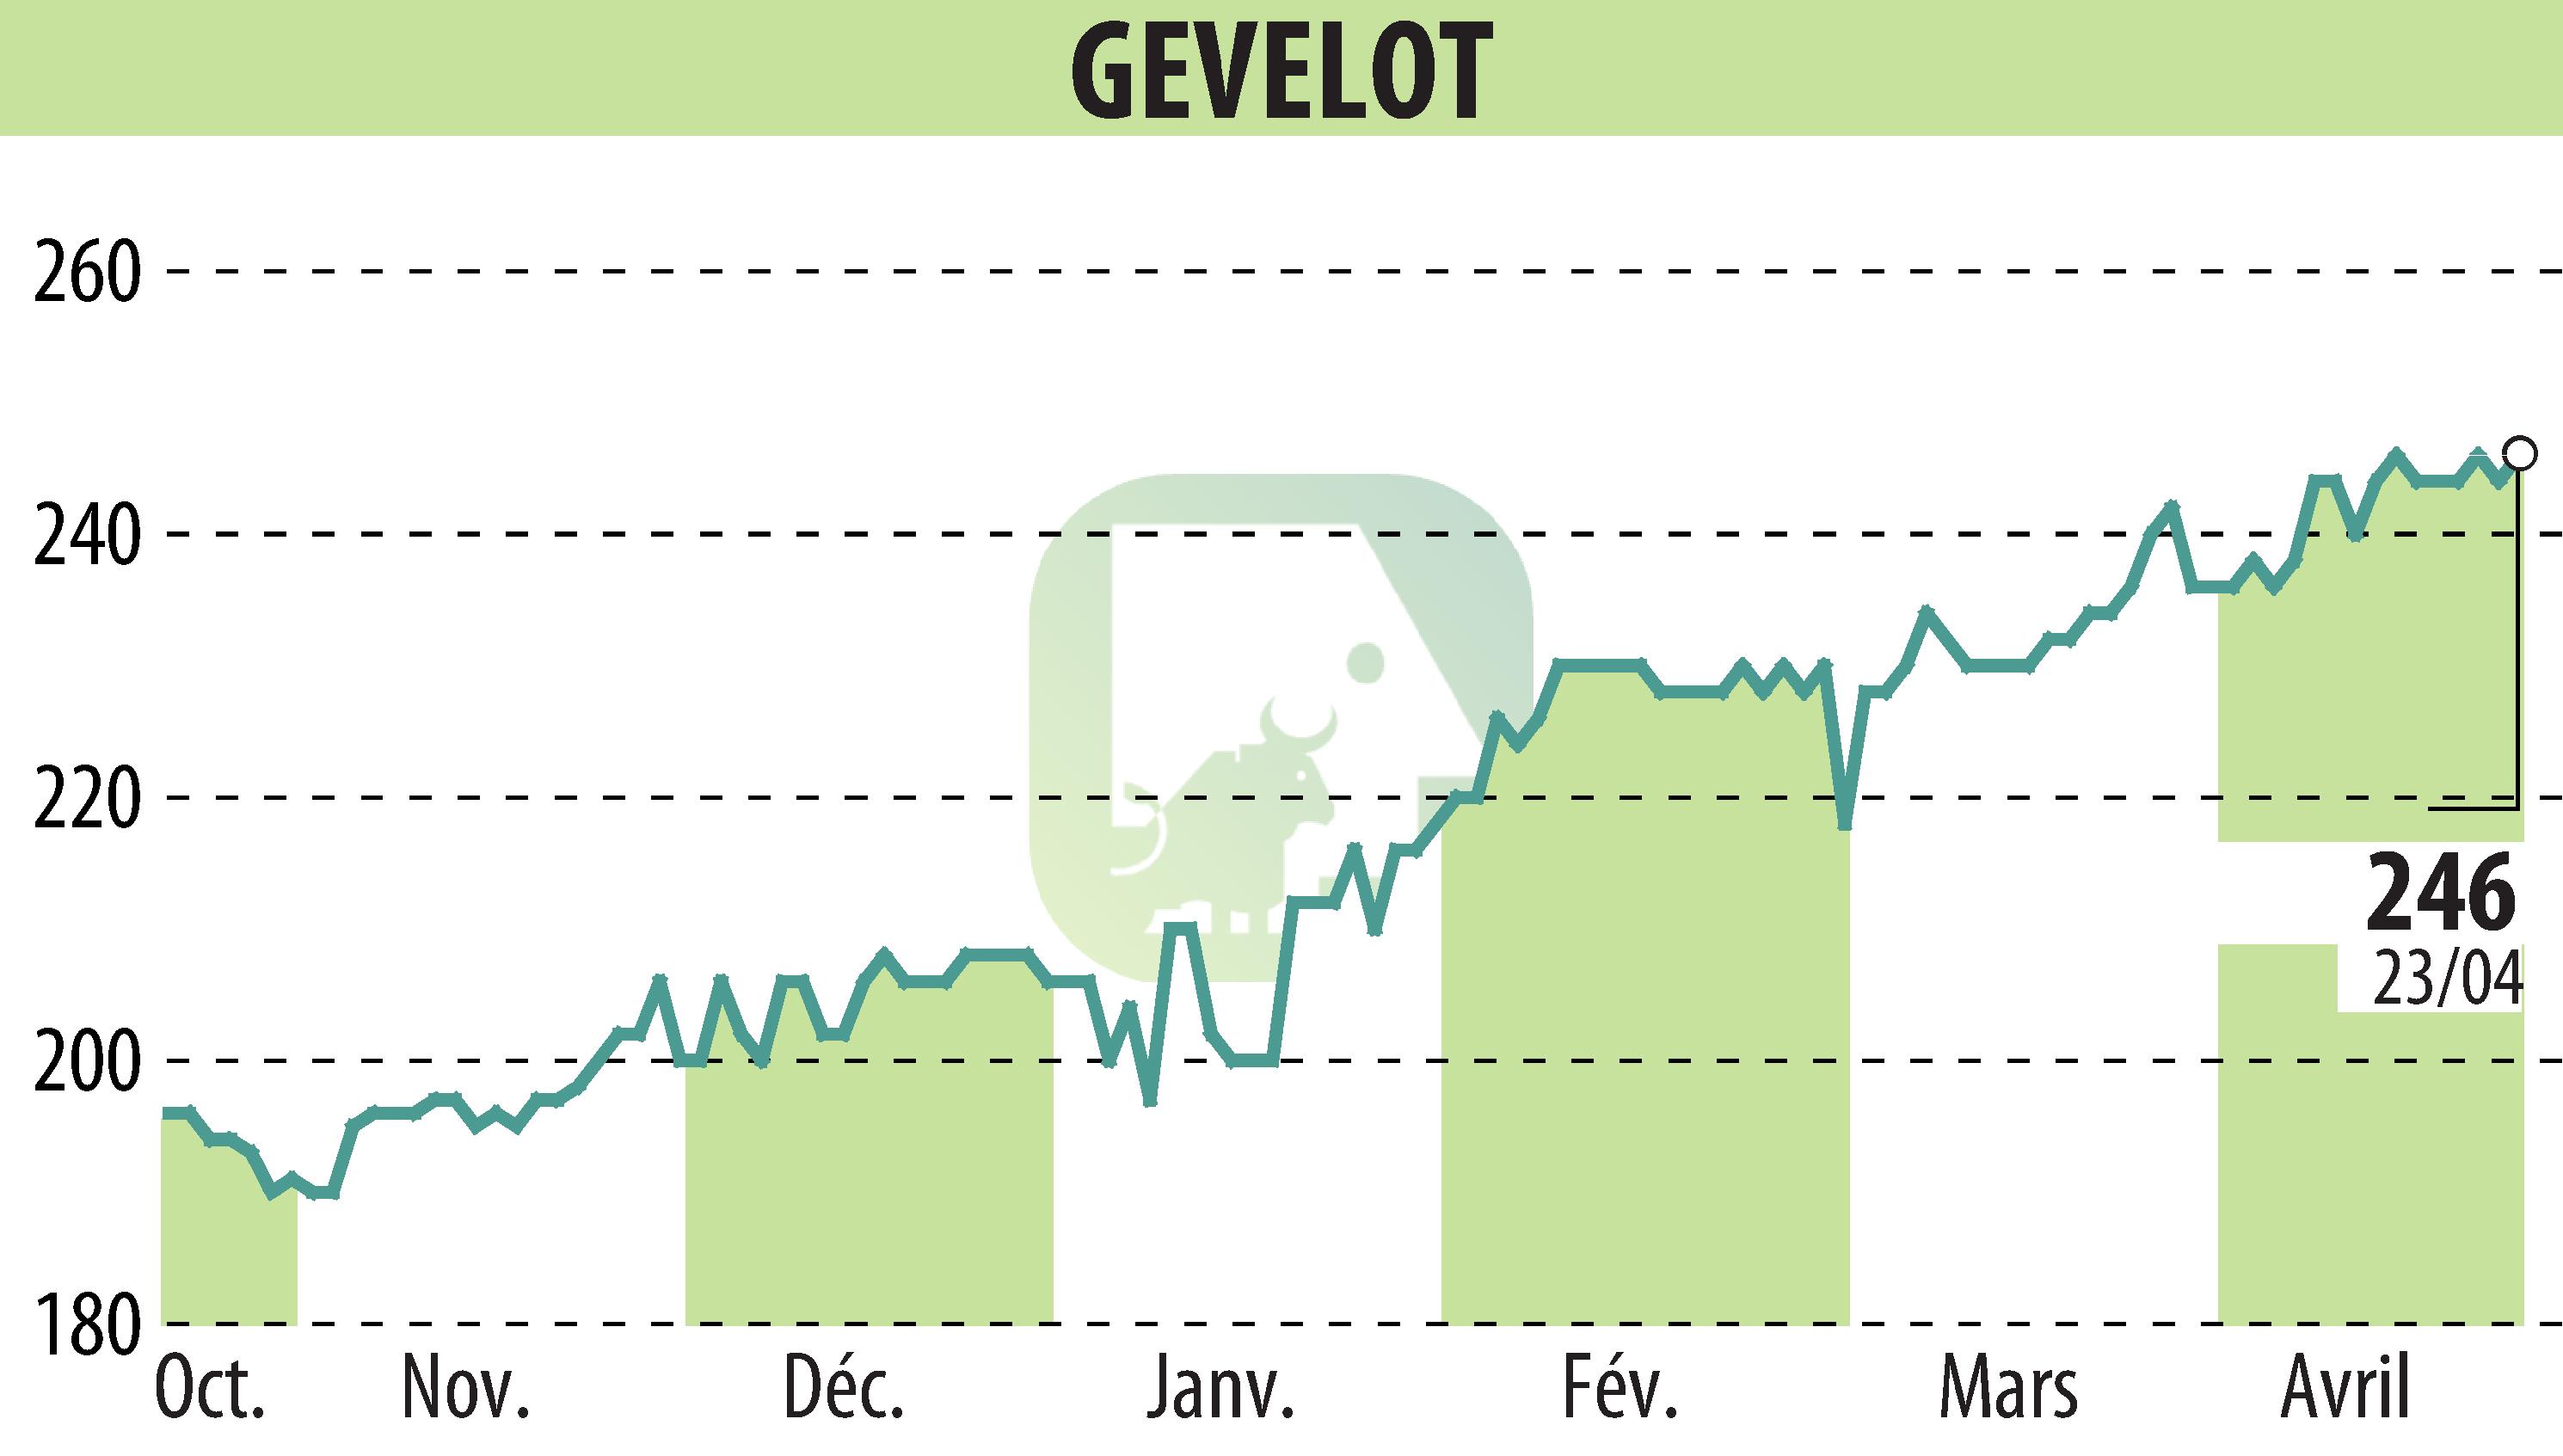 Stock price chart of GEVELOT (EPA:ALGEV) showing fluctuations.